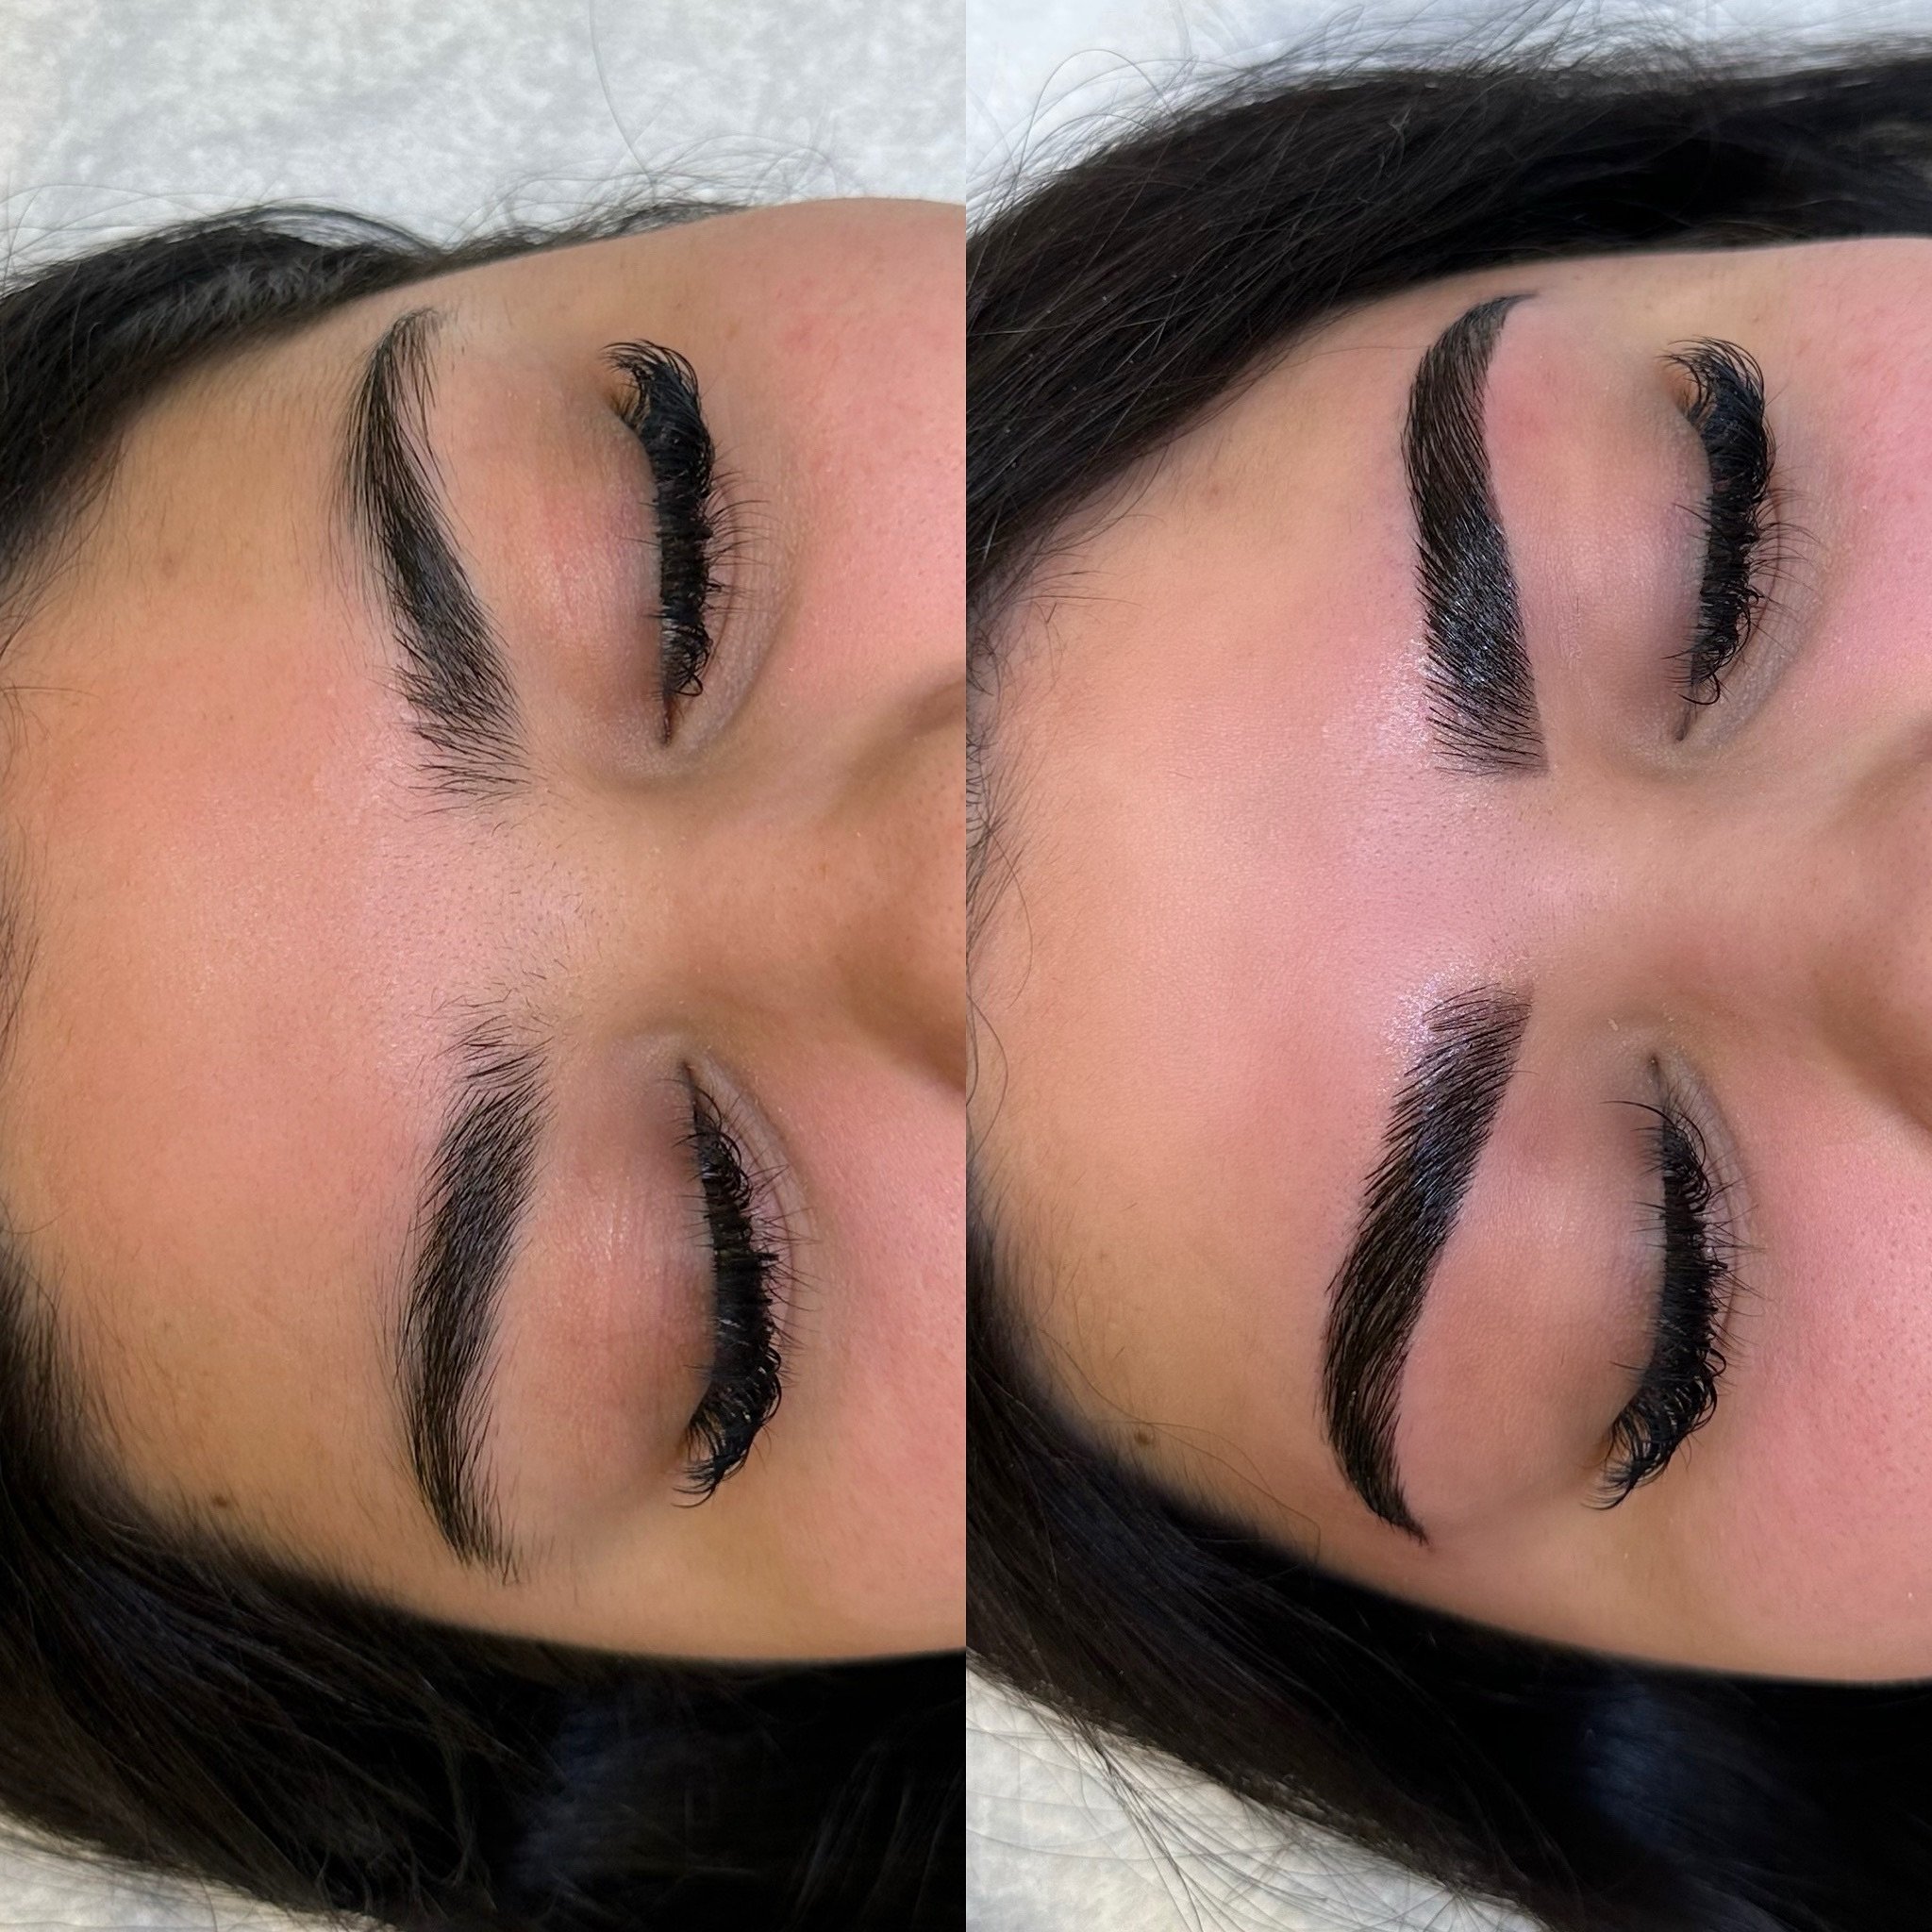 service &mdash; brow lamination &amp; tint 🔪 using @thuya_nyc &amp; @browcodepro stains in &ldquo;Perfecto brown&rdquo; and &ldquo;dark roast&rdquo; 

am i still obsessed? yes 

-
-
-
-
-
-
-
#Browlamination#Azbrows#azbrowlamination#phoenixbrows#pho